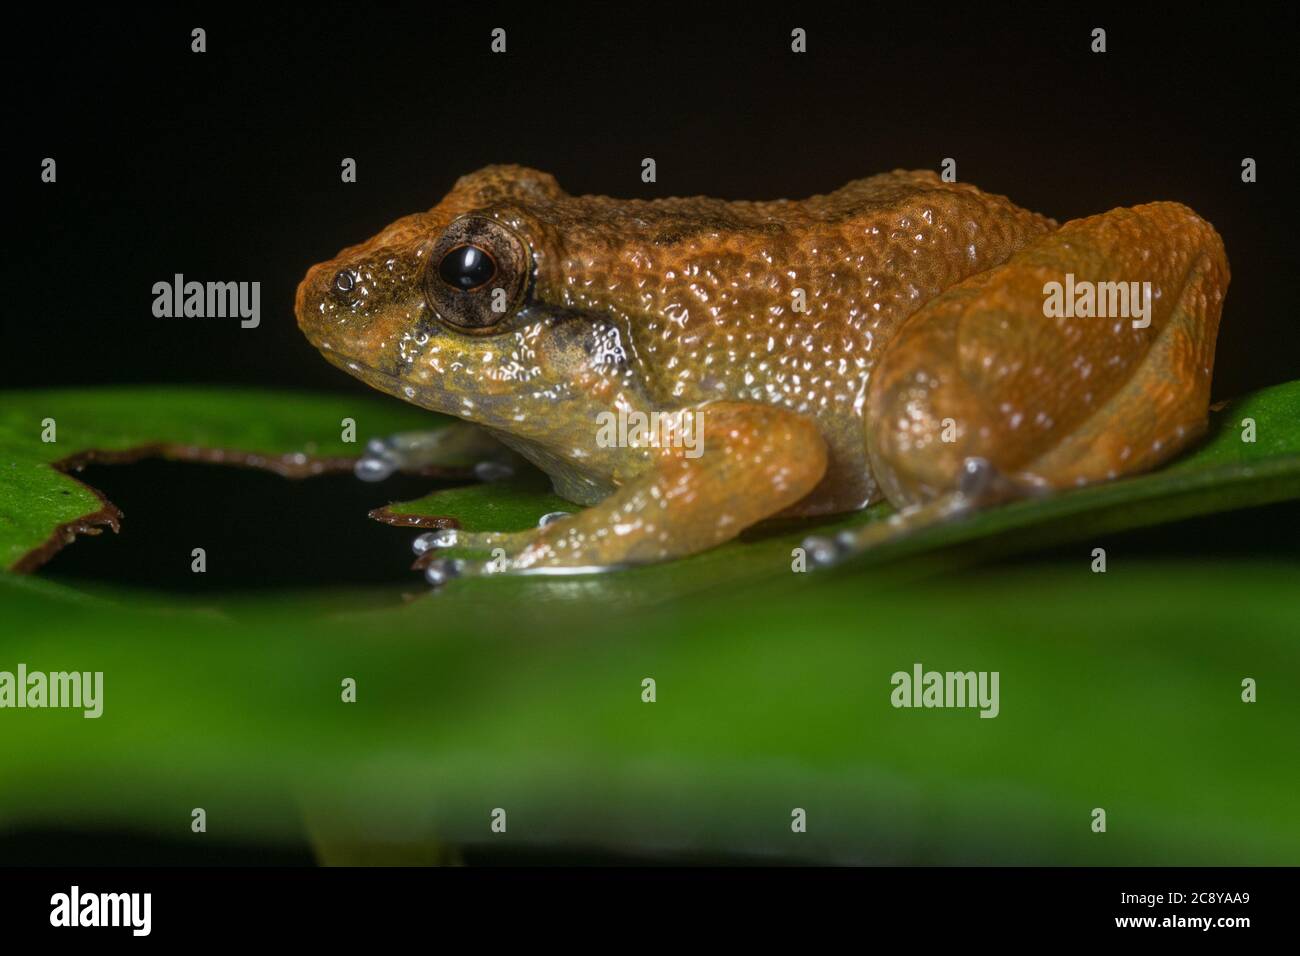 Alcalus baluensis formerly Ingerana, the dwarf mountain frog is a tiny species endemic to northeastern Borneo in southeast Asia. Stock Photo